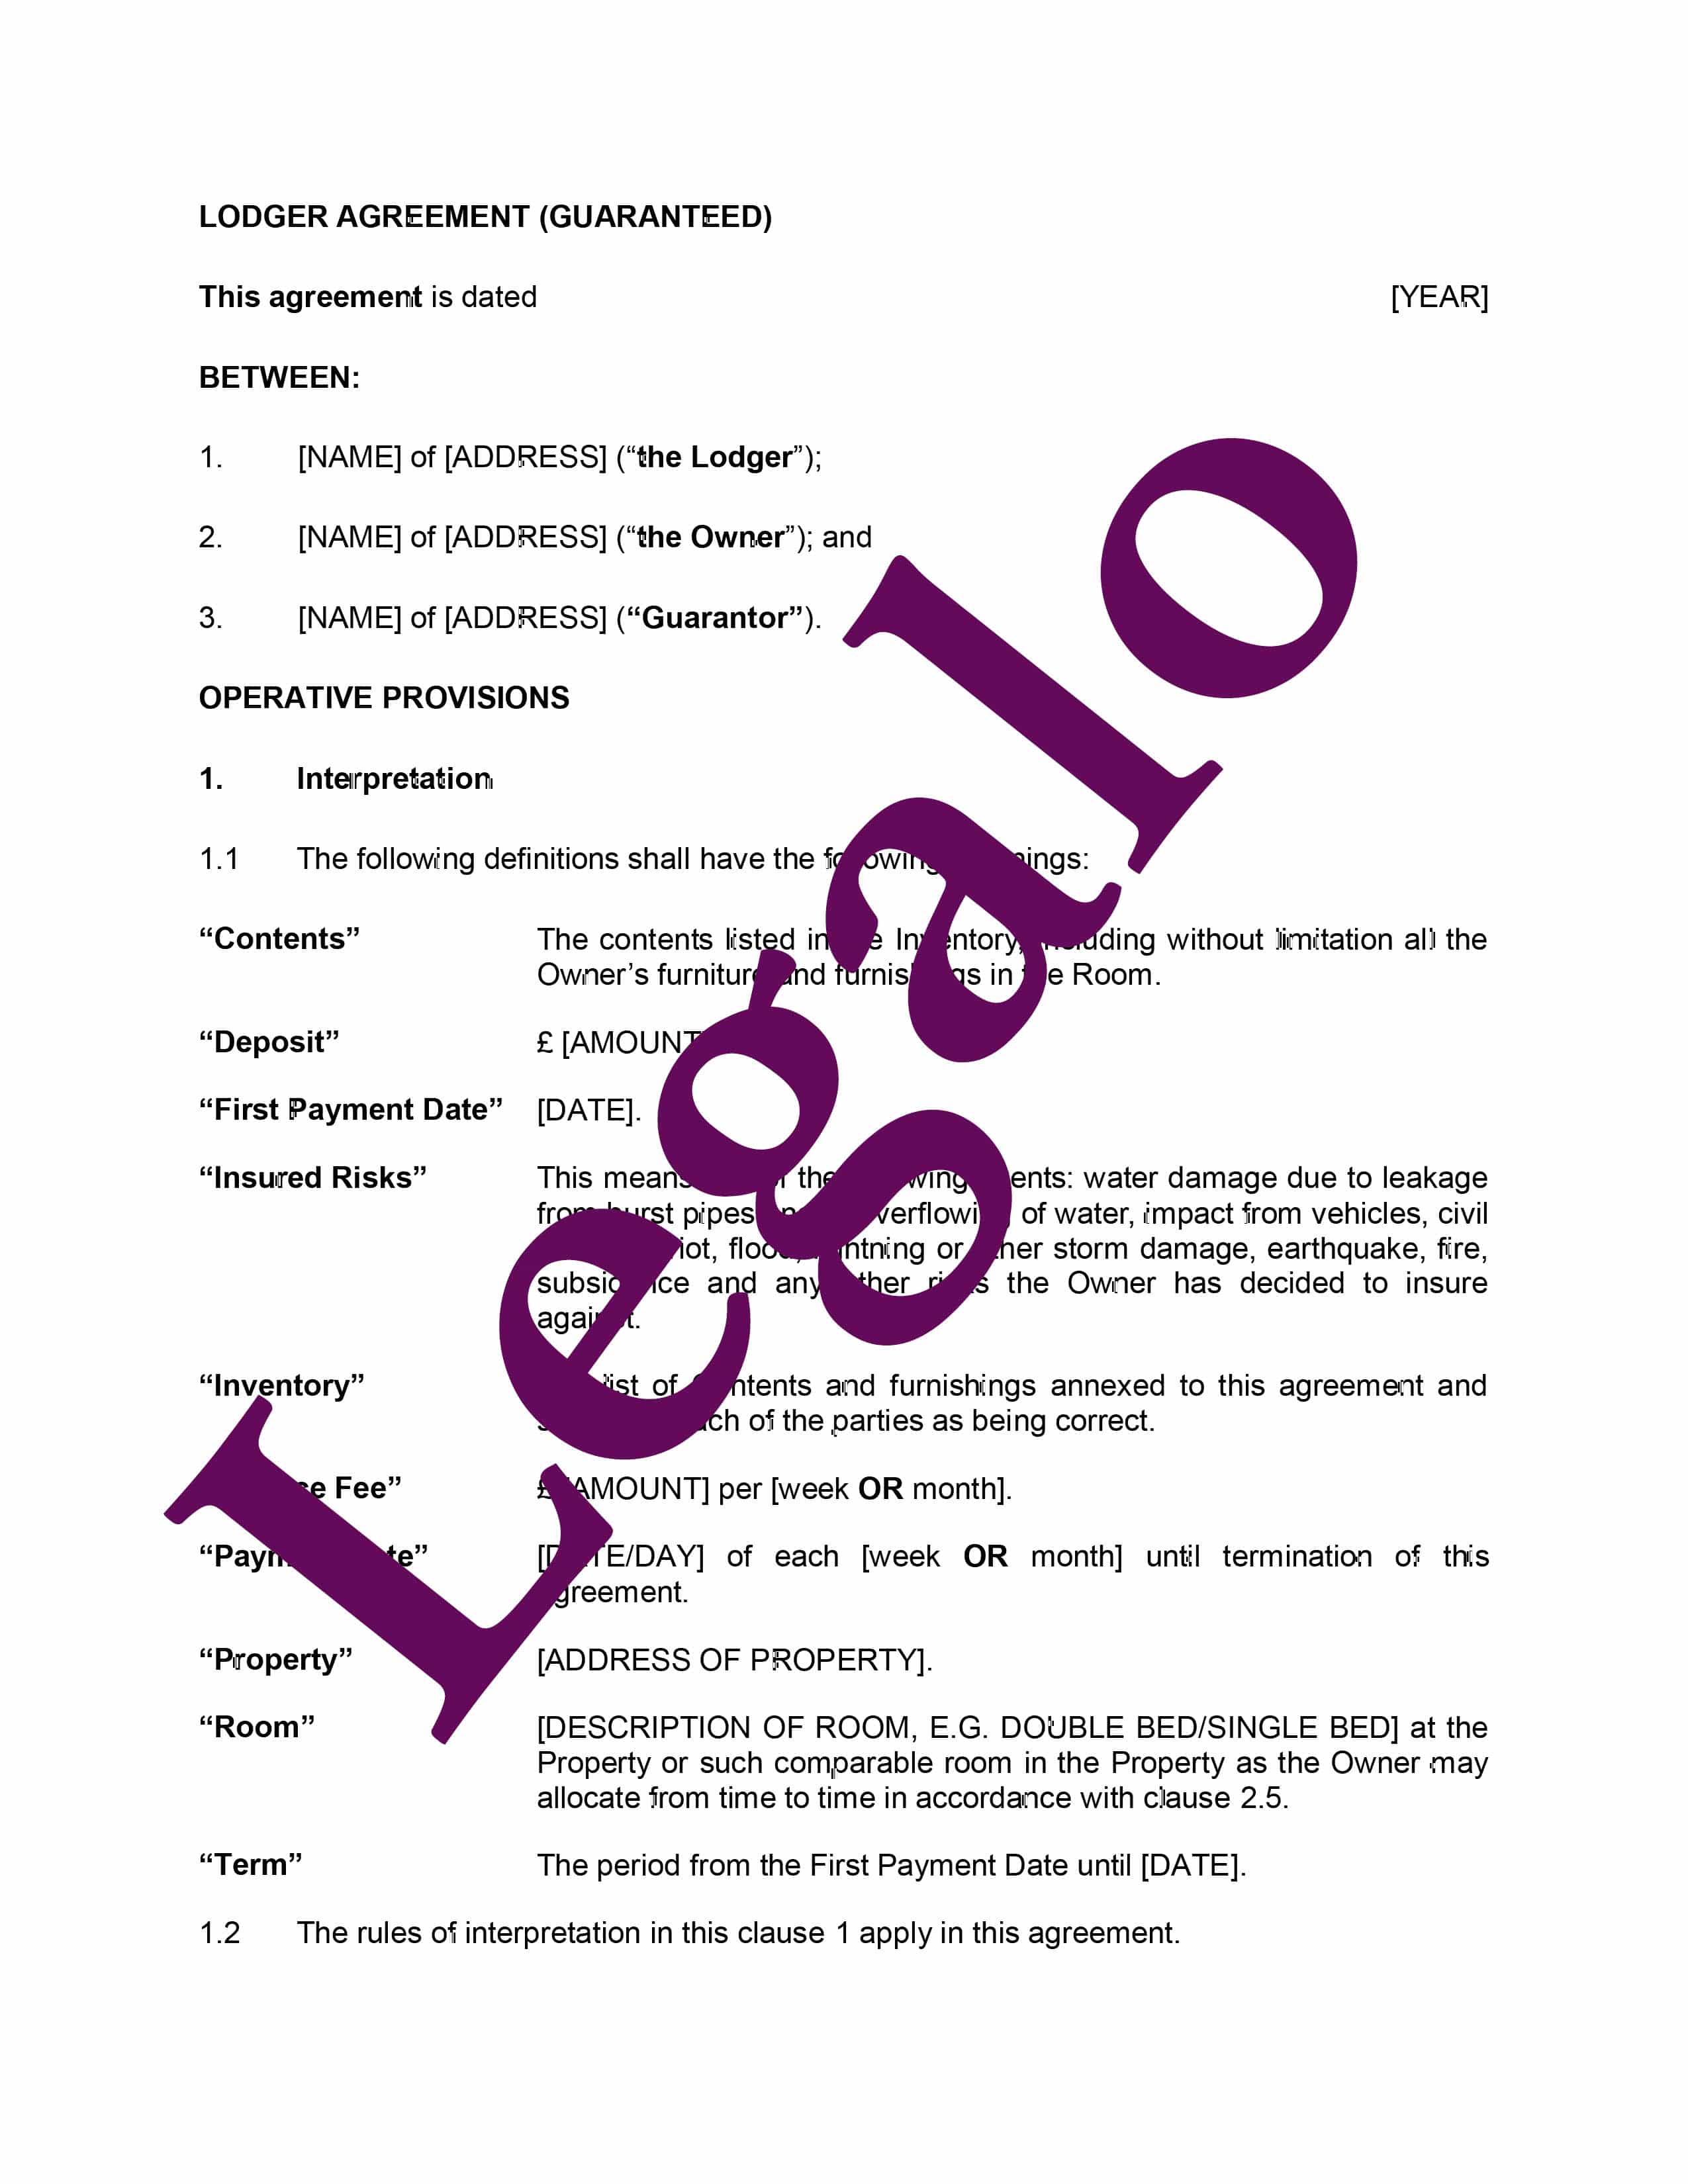 lodger-agreement-with-guarantor-legalo-united-kingdom